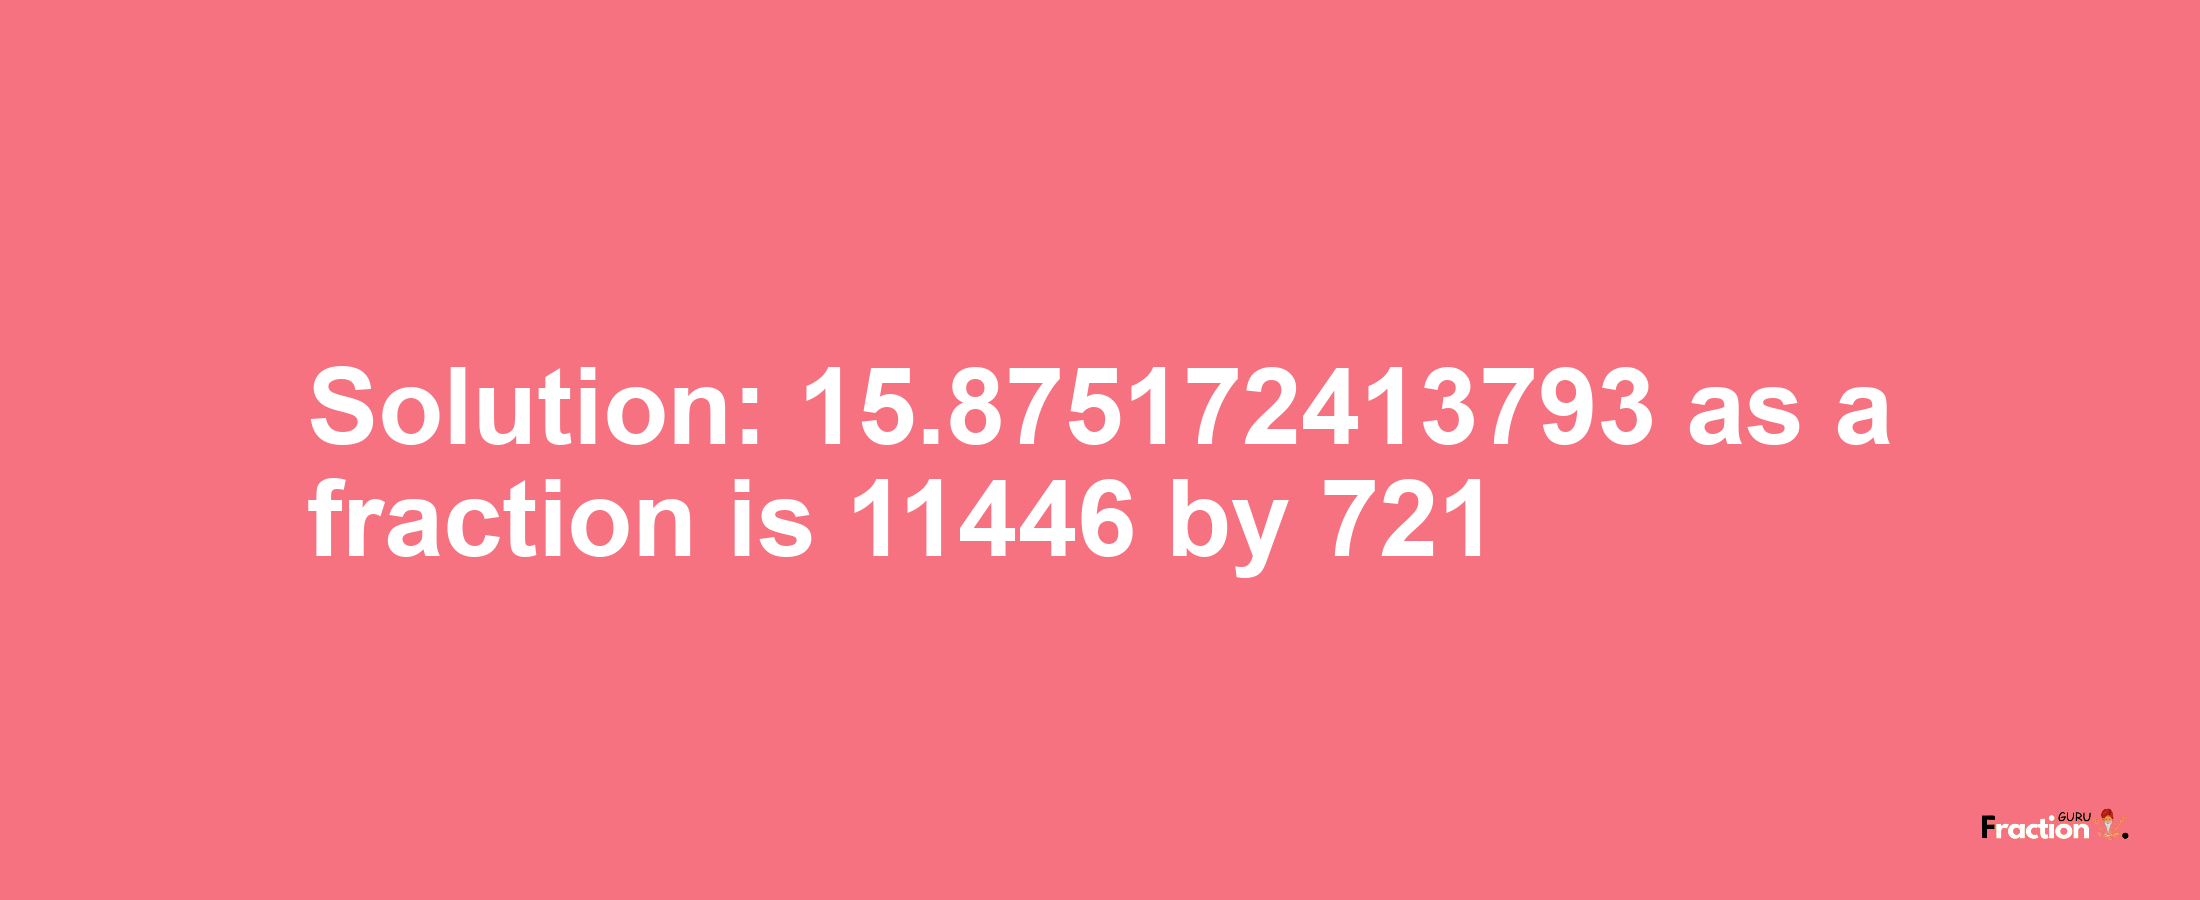 Solution:15.875172413793 as a fraction is 11446/721